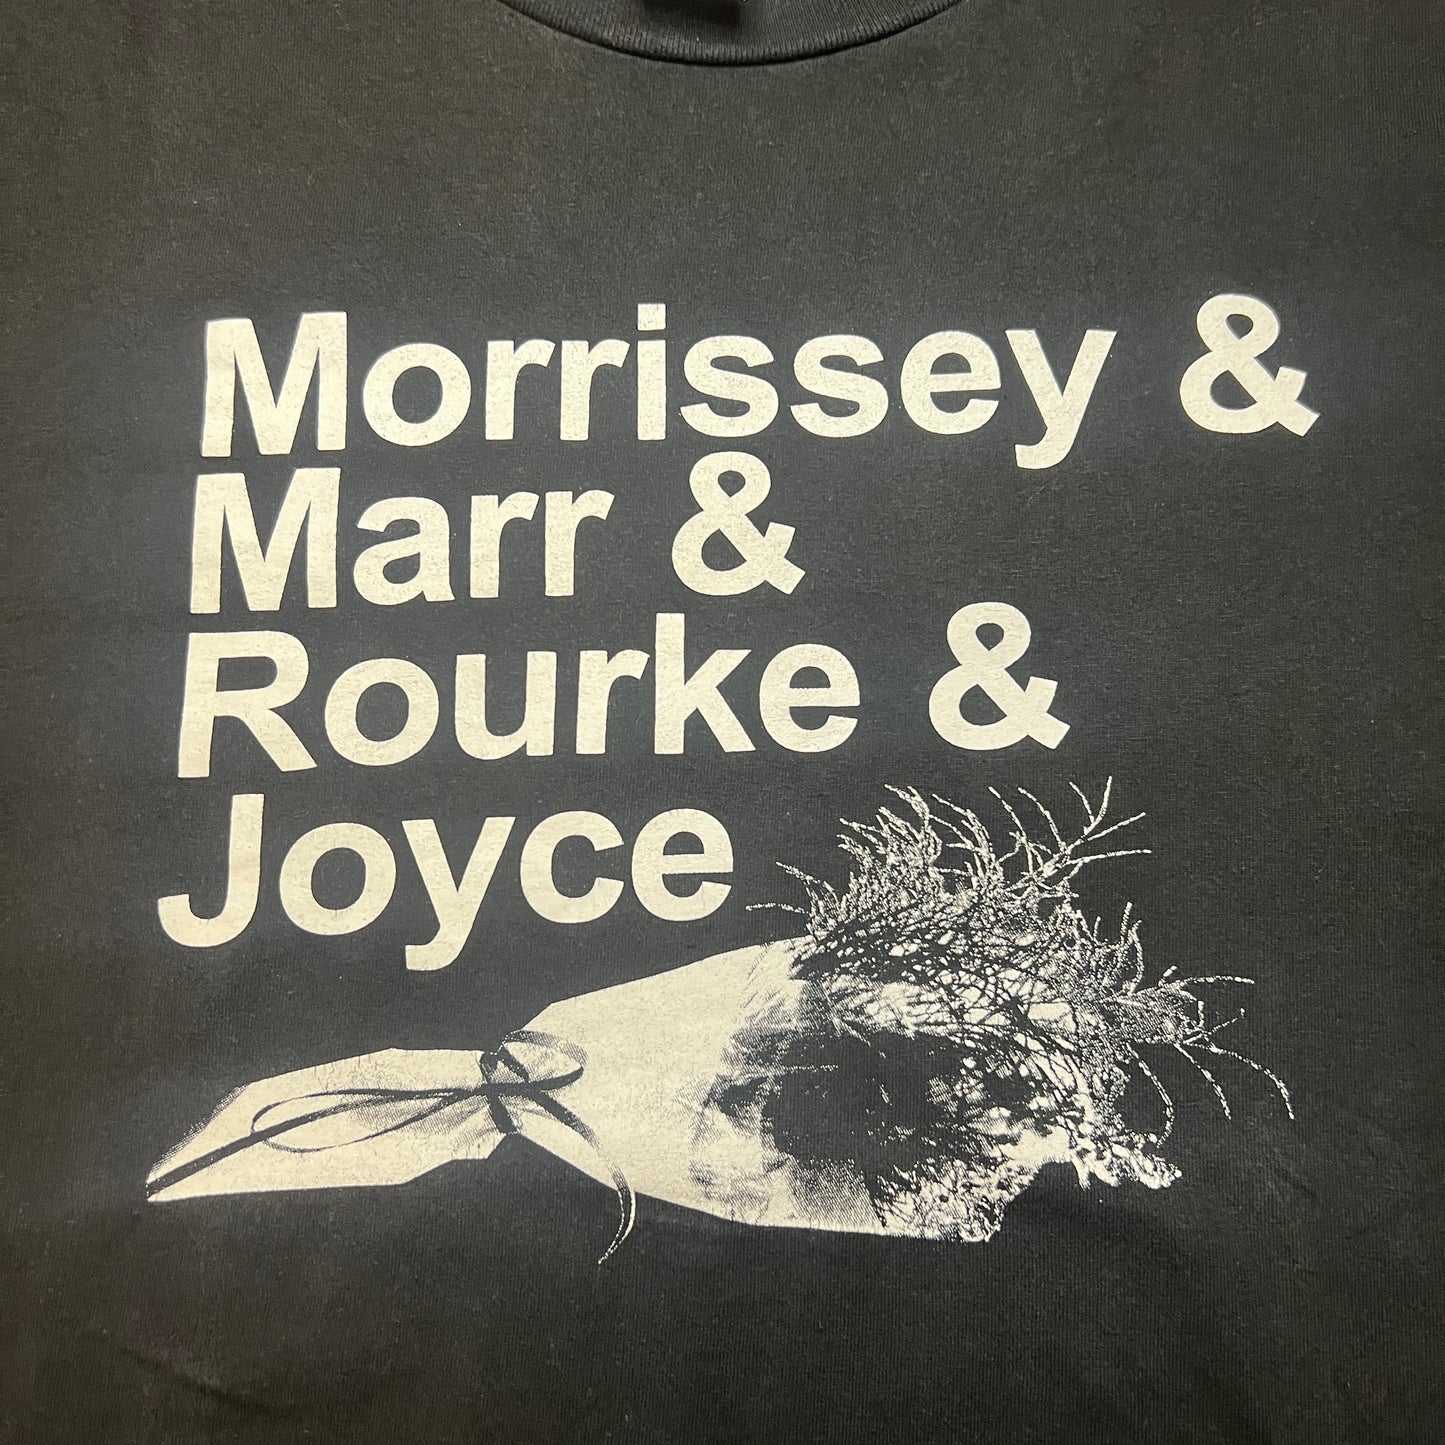 The Smiths Band Morrissey, Marr, Rourke, Joyce T-Shirt Size XL